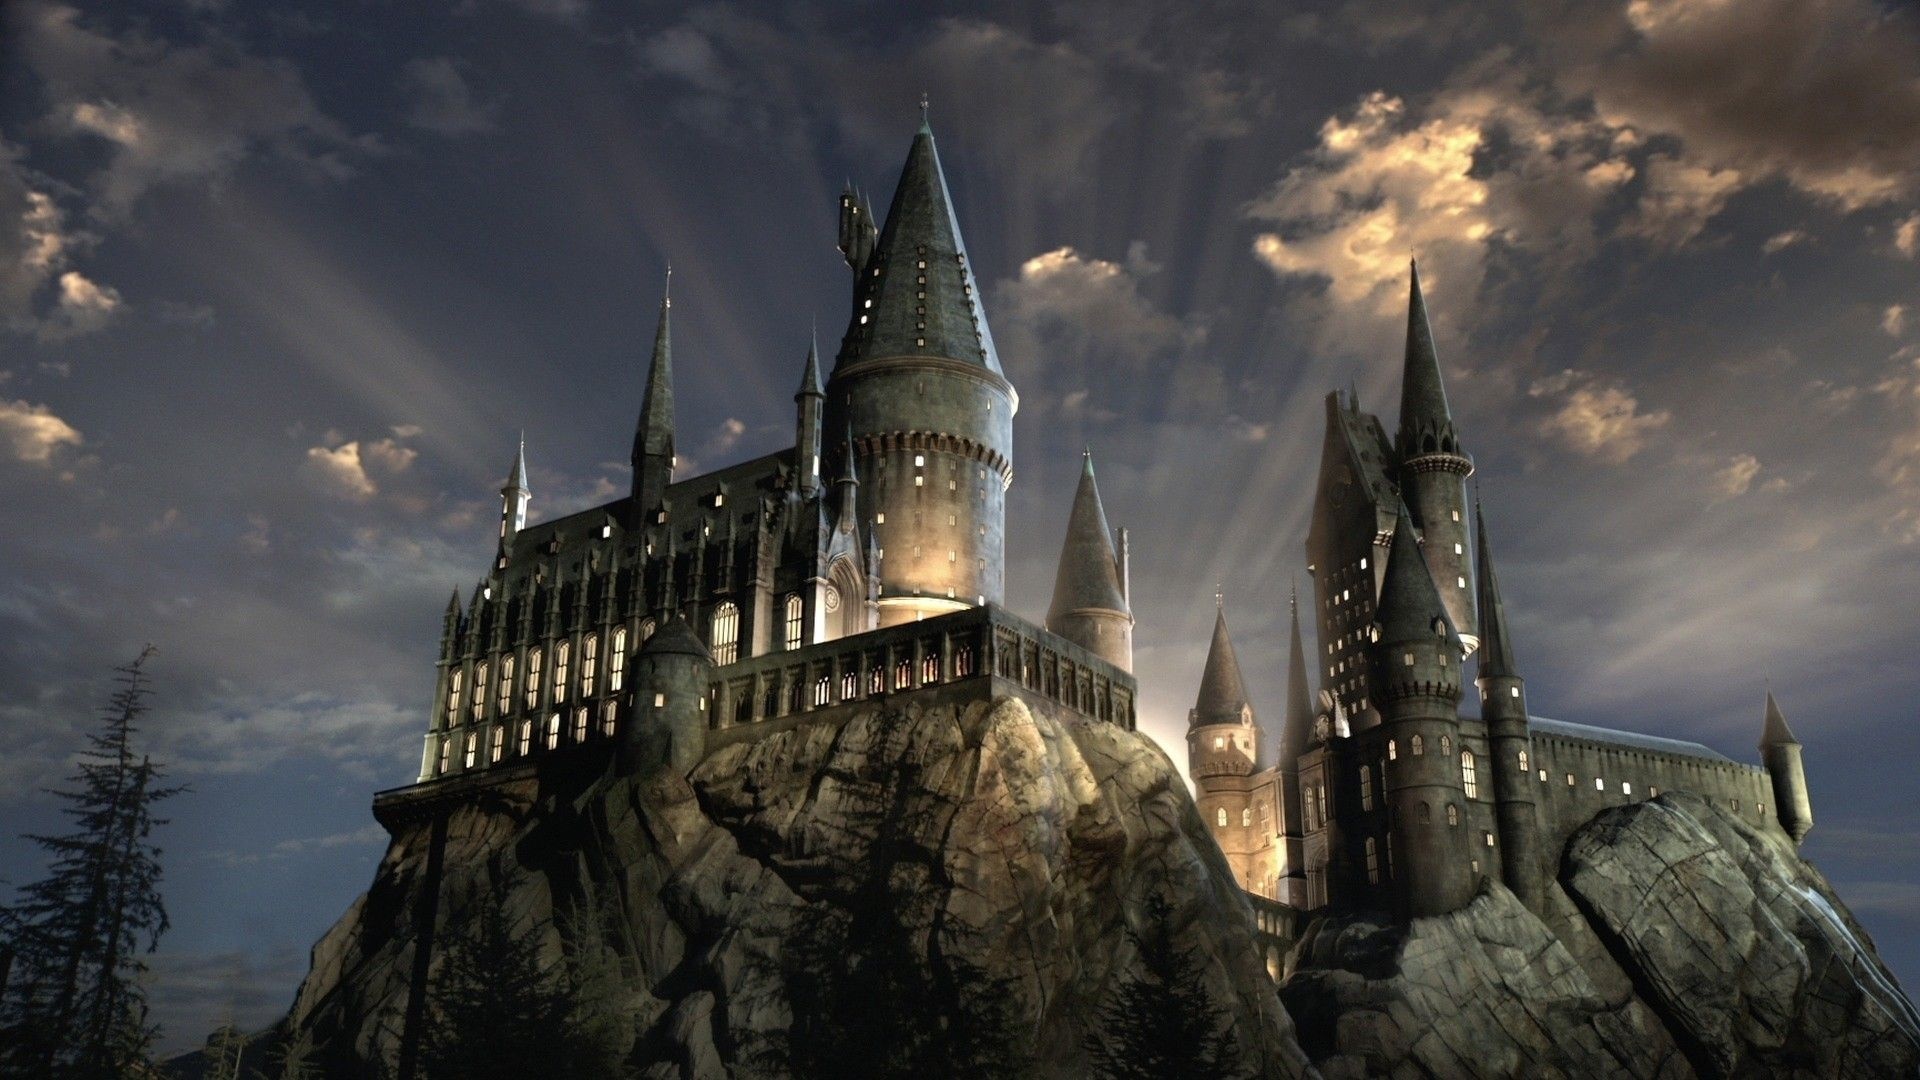 Hogwarts Castle movies, 4K wallpapers, High-quality visuals, Harry Potter theme, 1920x1080 Full HD Desktop